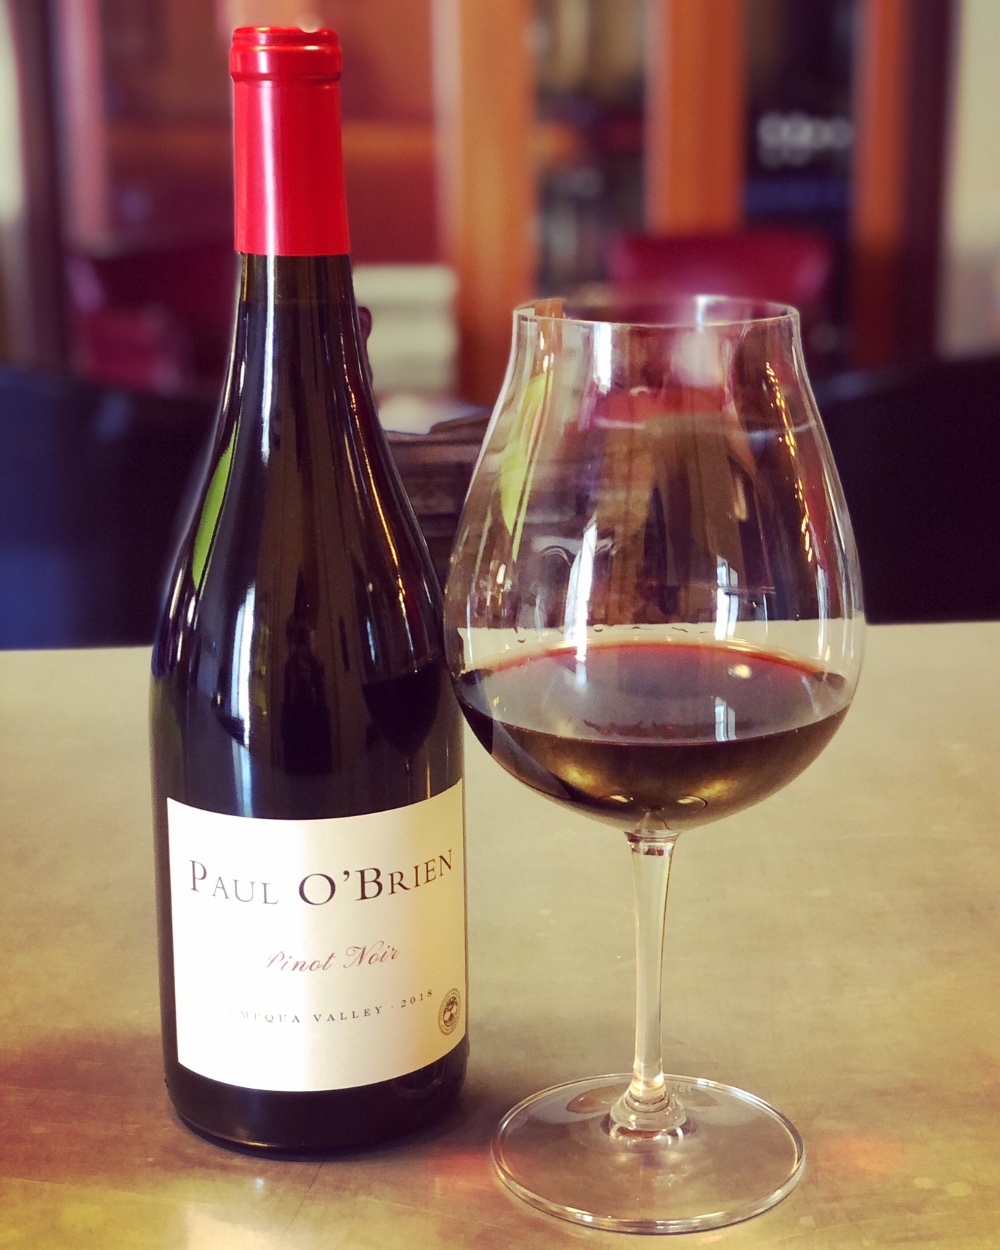 Wine glass filled with Paul O'Brien Pinot Noir